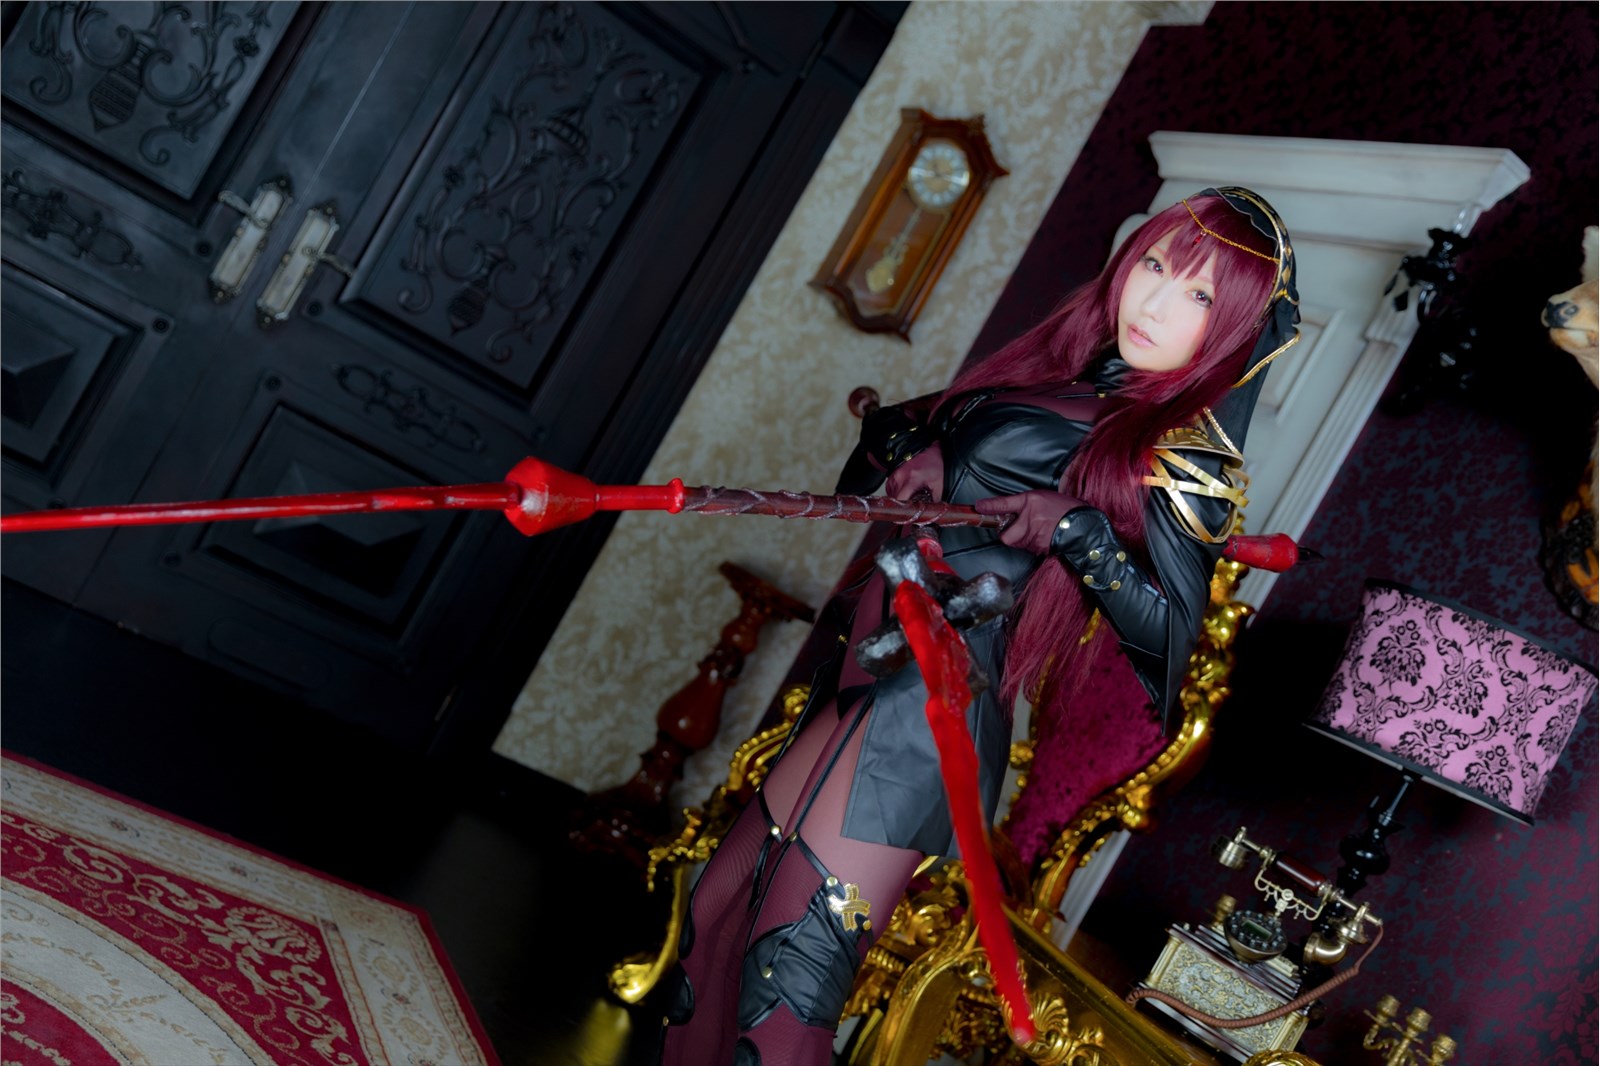 cos (Cosplay)(C92) Shooting Star (サク) Shadow Queen 598MB1(73)